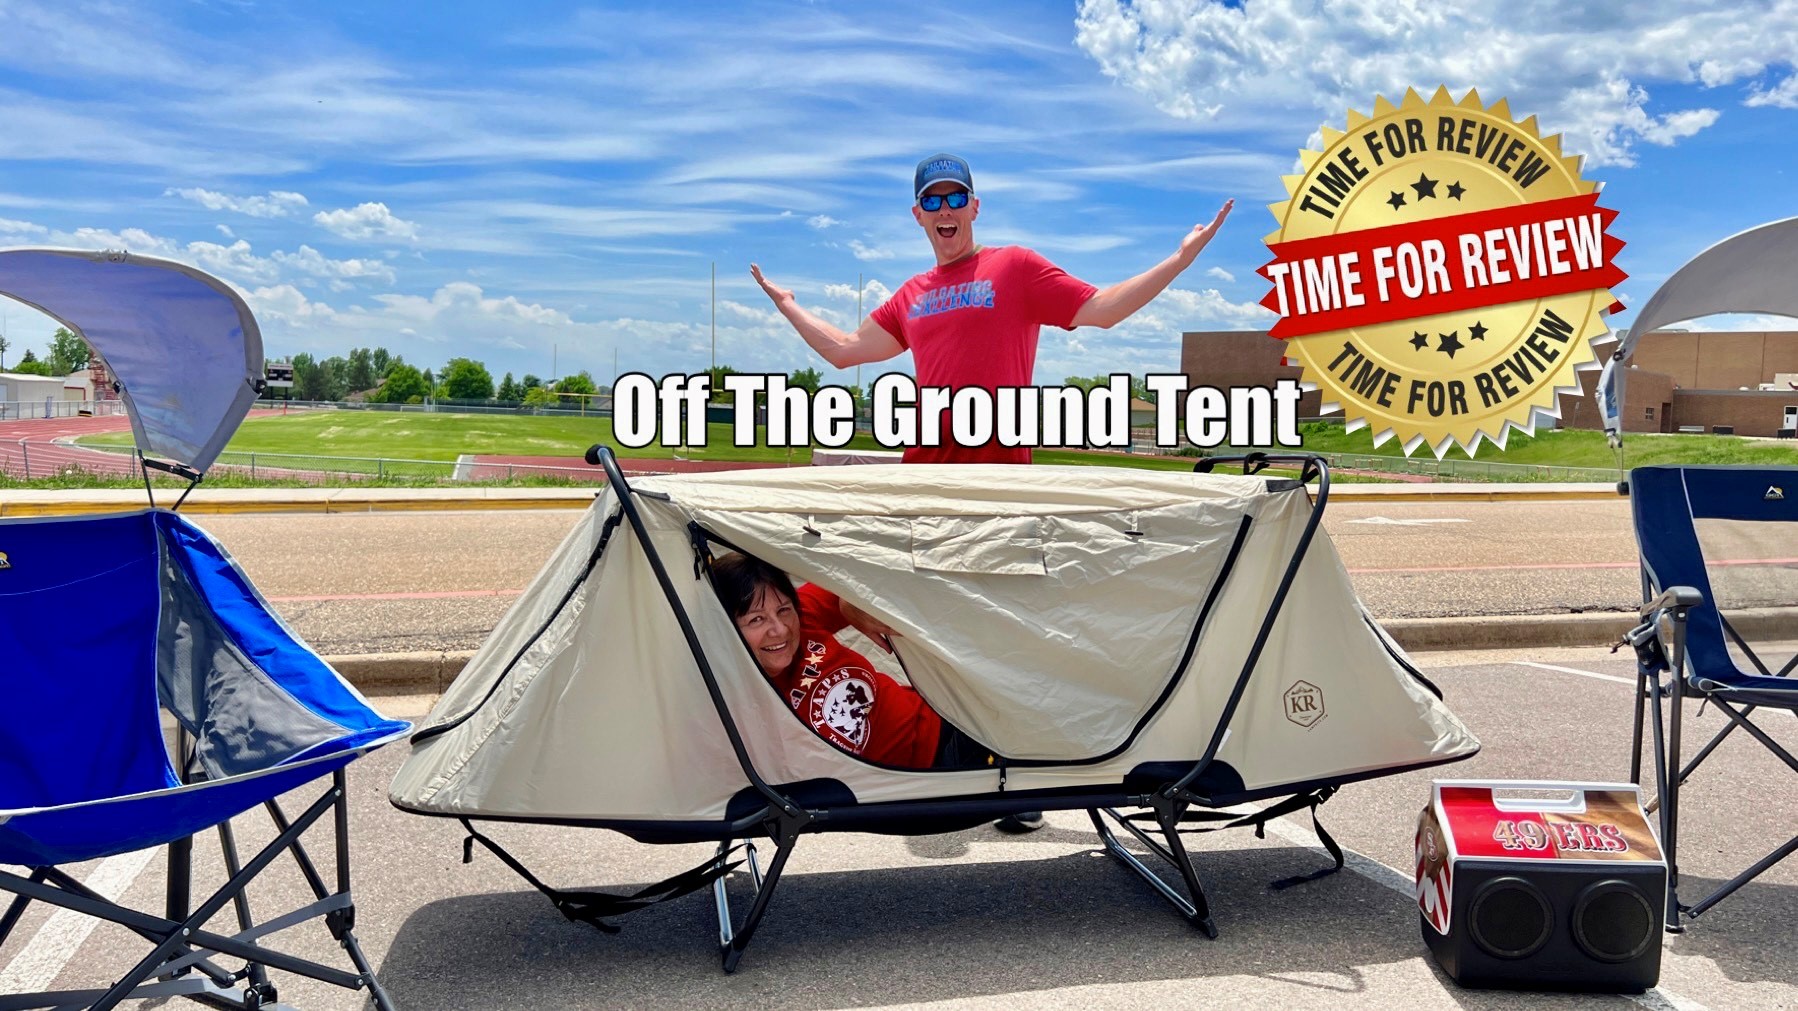 Kamp Rite Off the Ground Tent Review - Tailgating Challenge